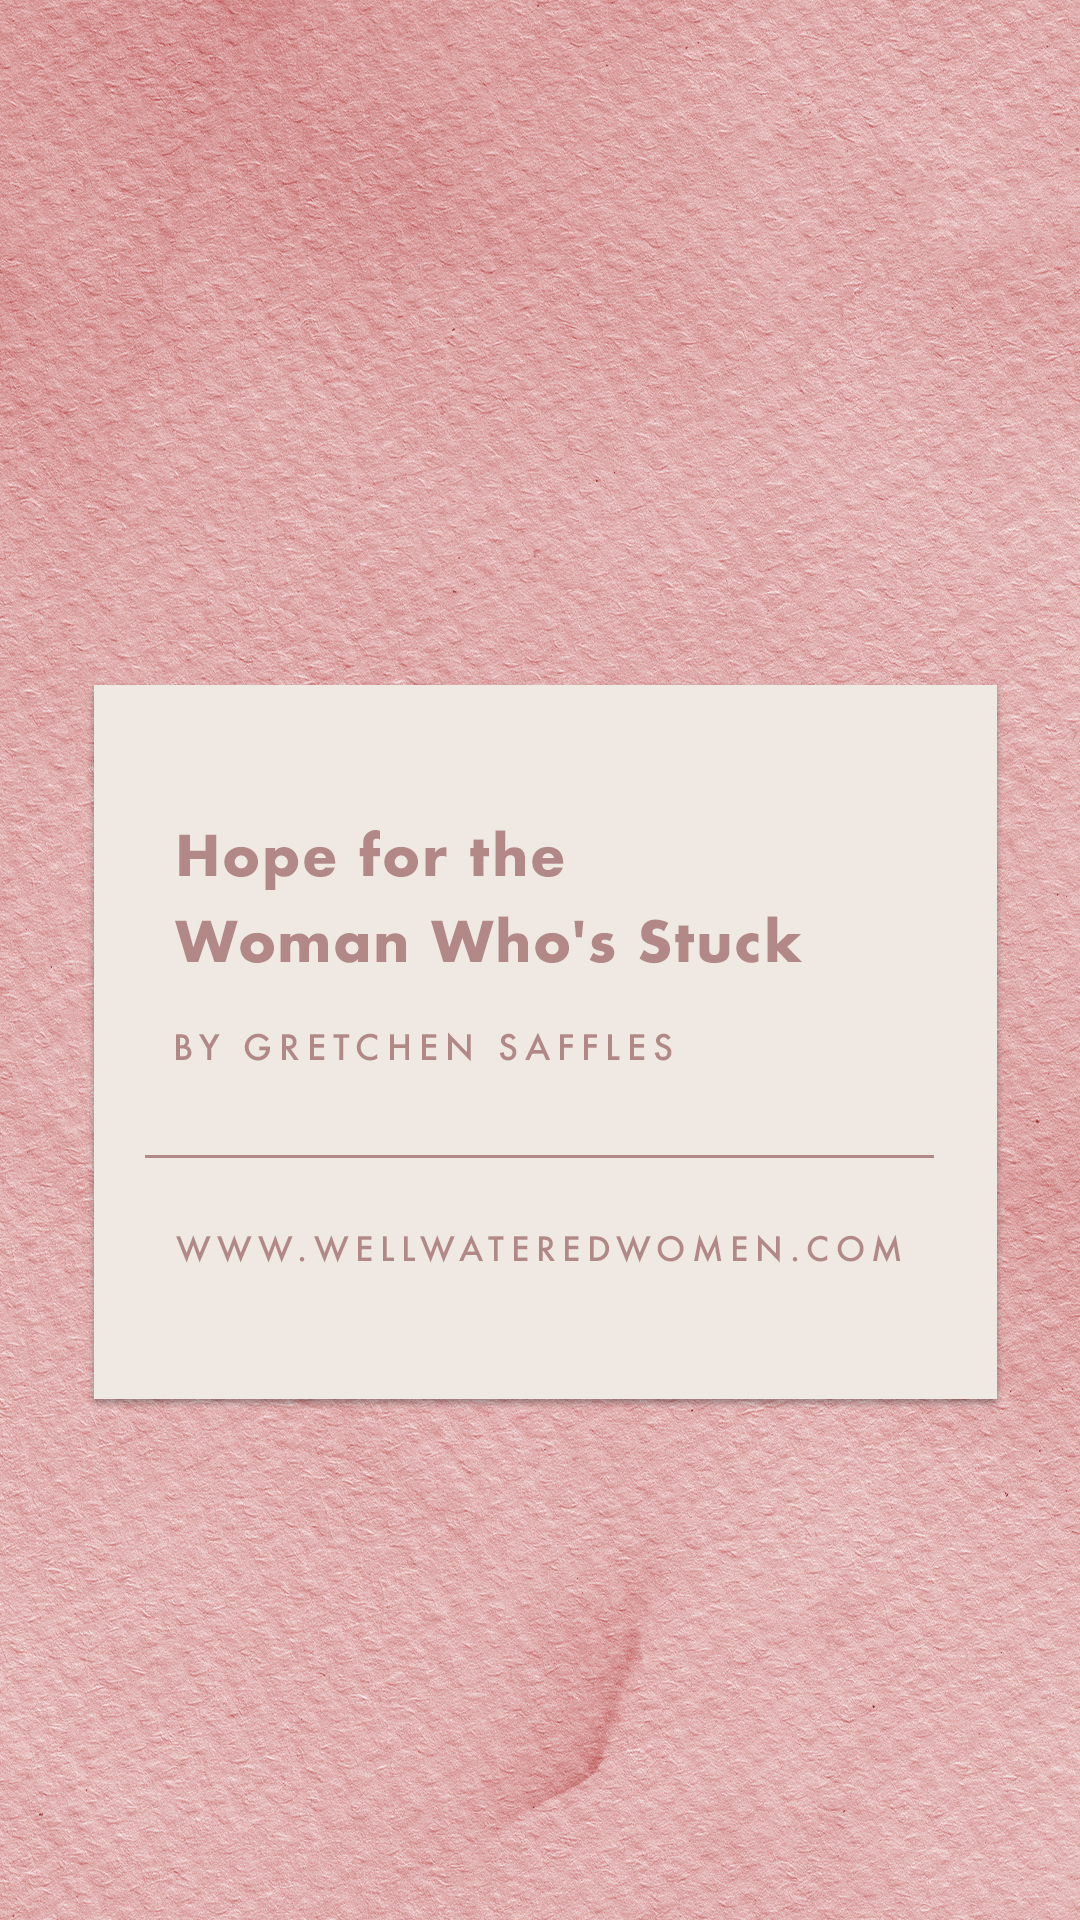 Hope for the Woman Who's Stuck-an Article from Well-Watered Women